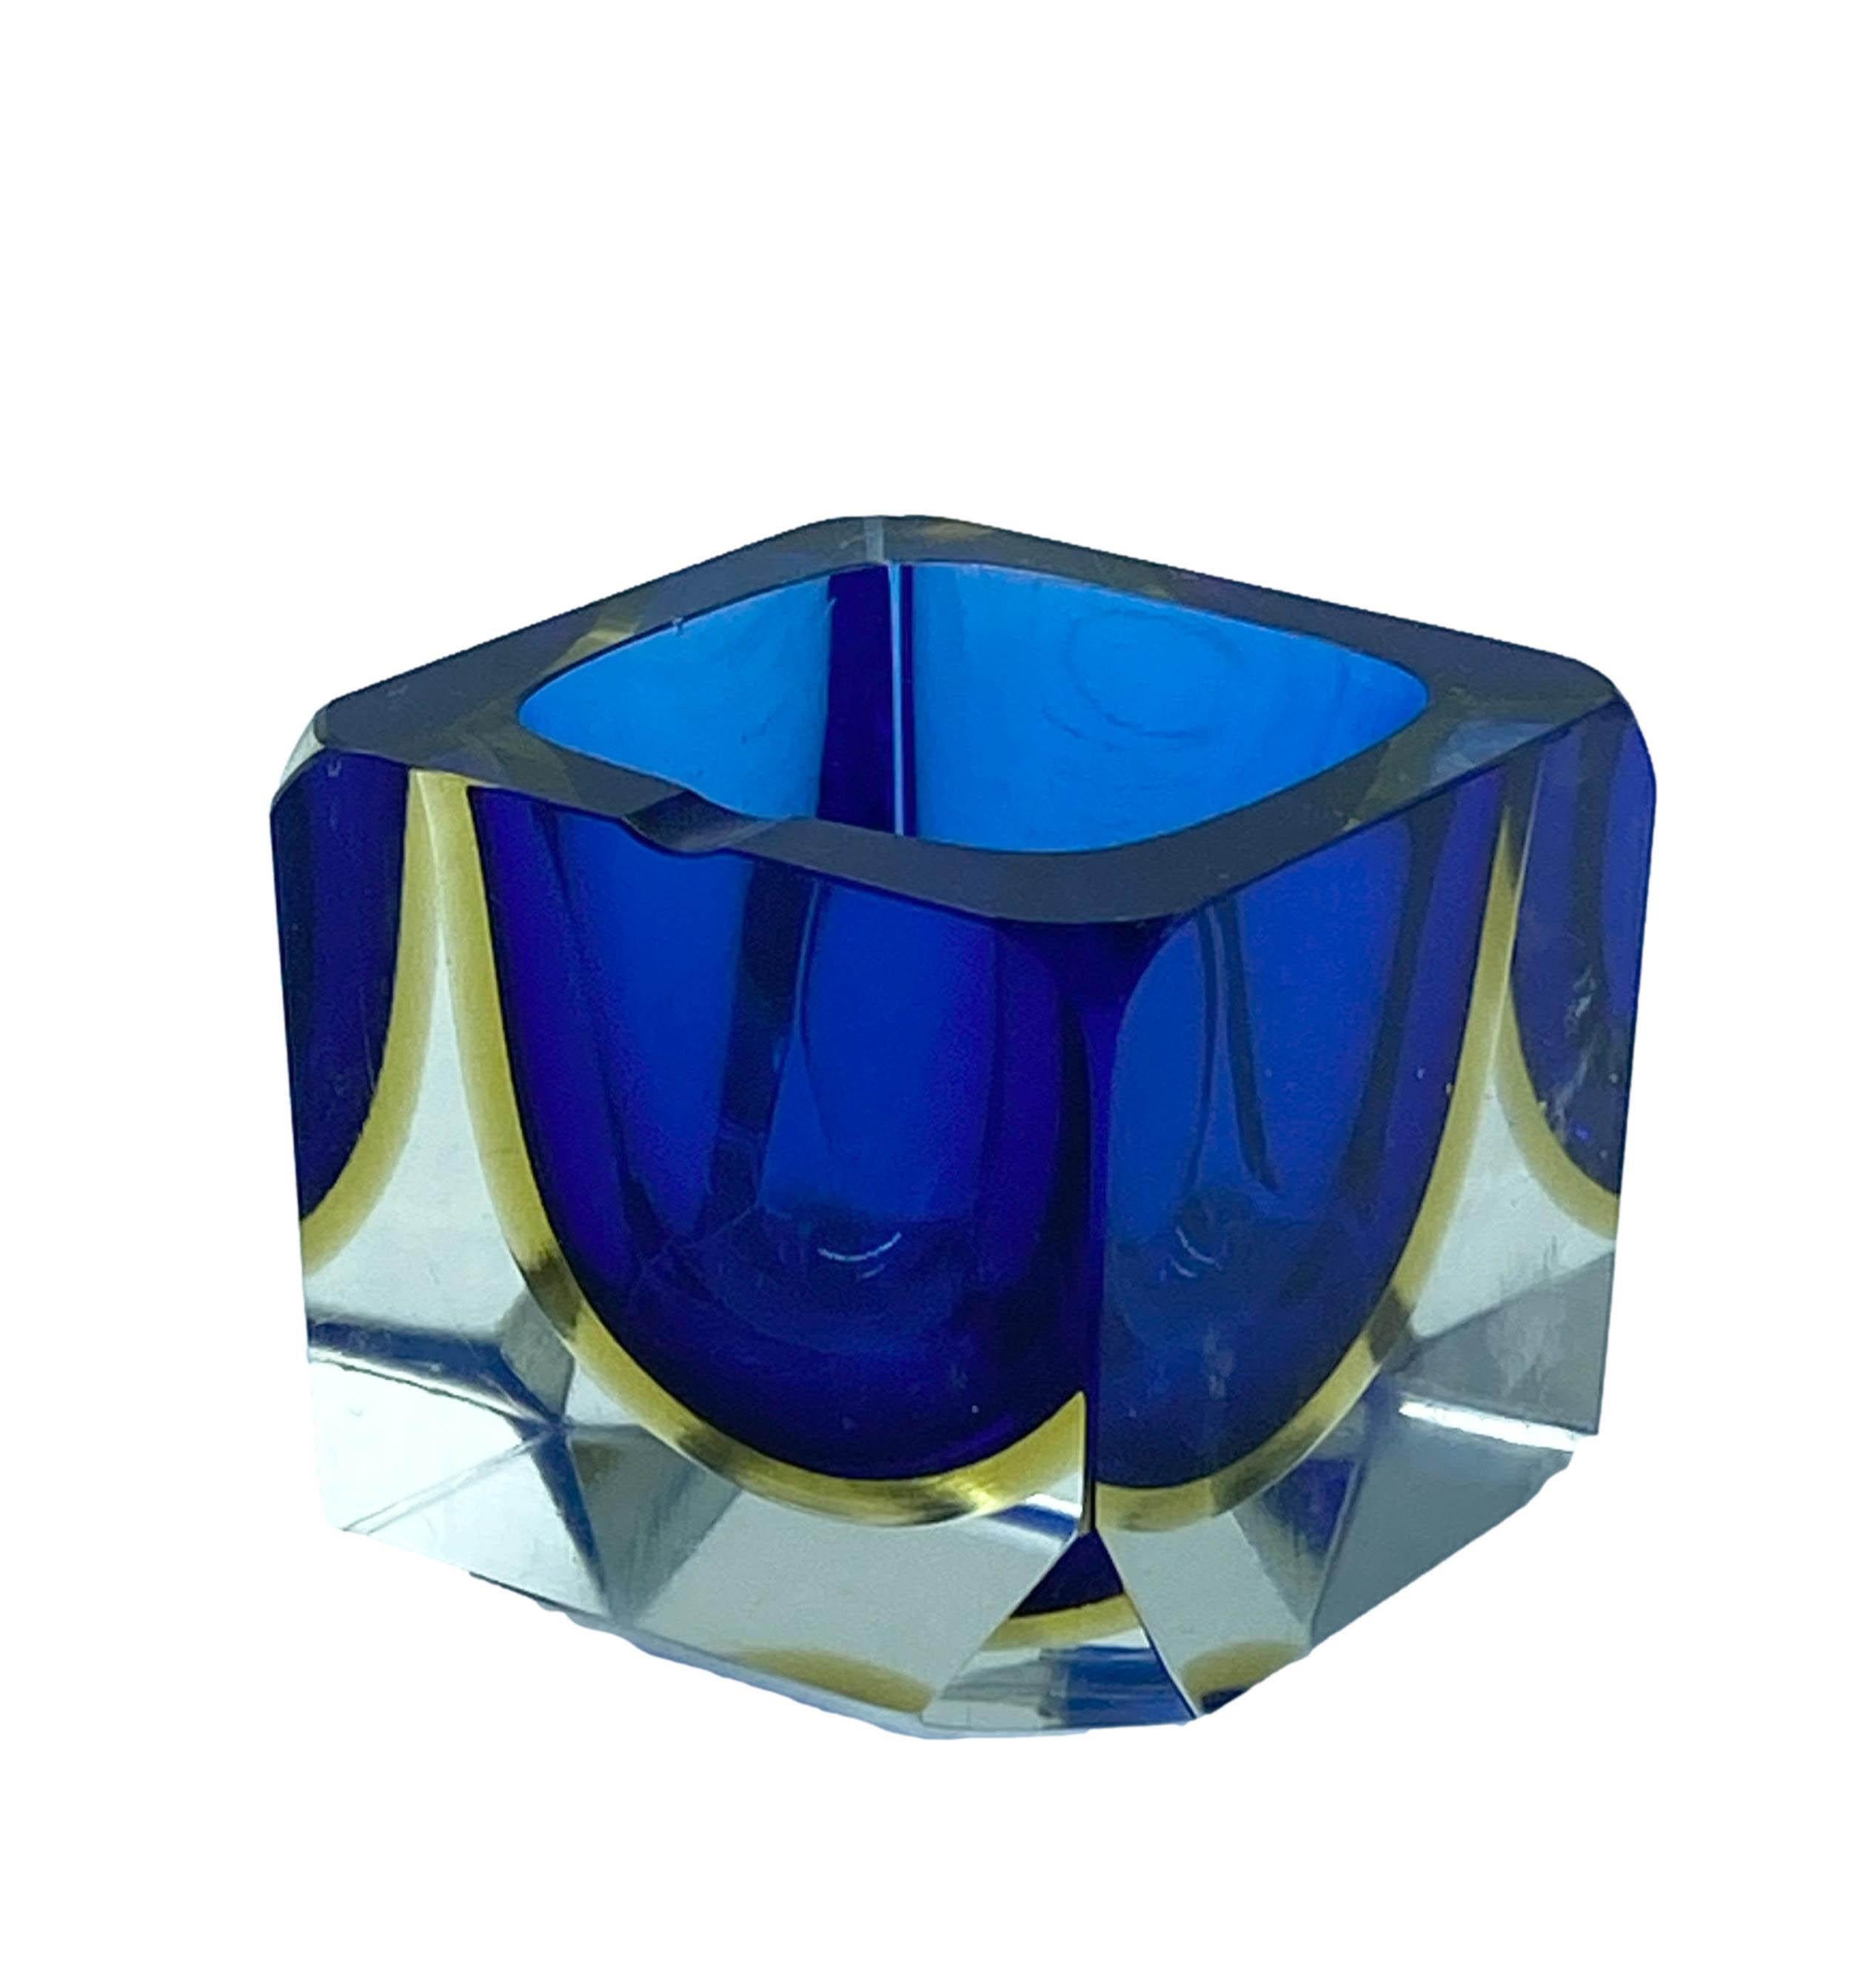 Murano glass ashtray submerged blue, yellow and transparent, attributed to Flavio Poli Made in Italy 1960.